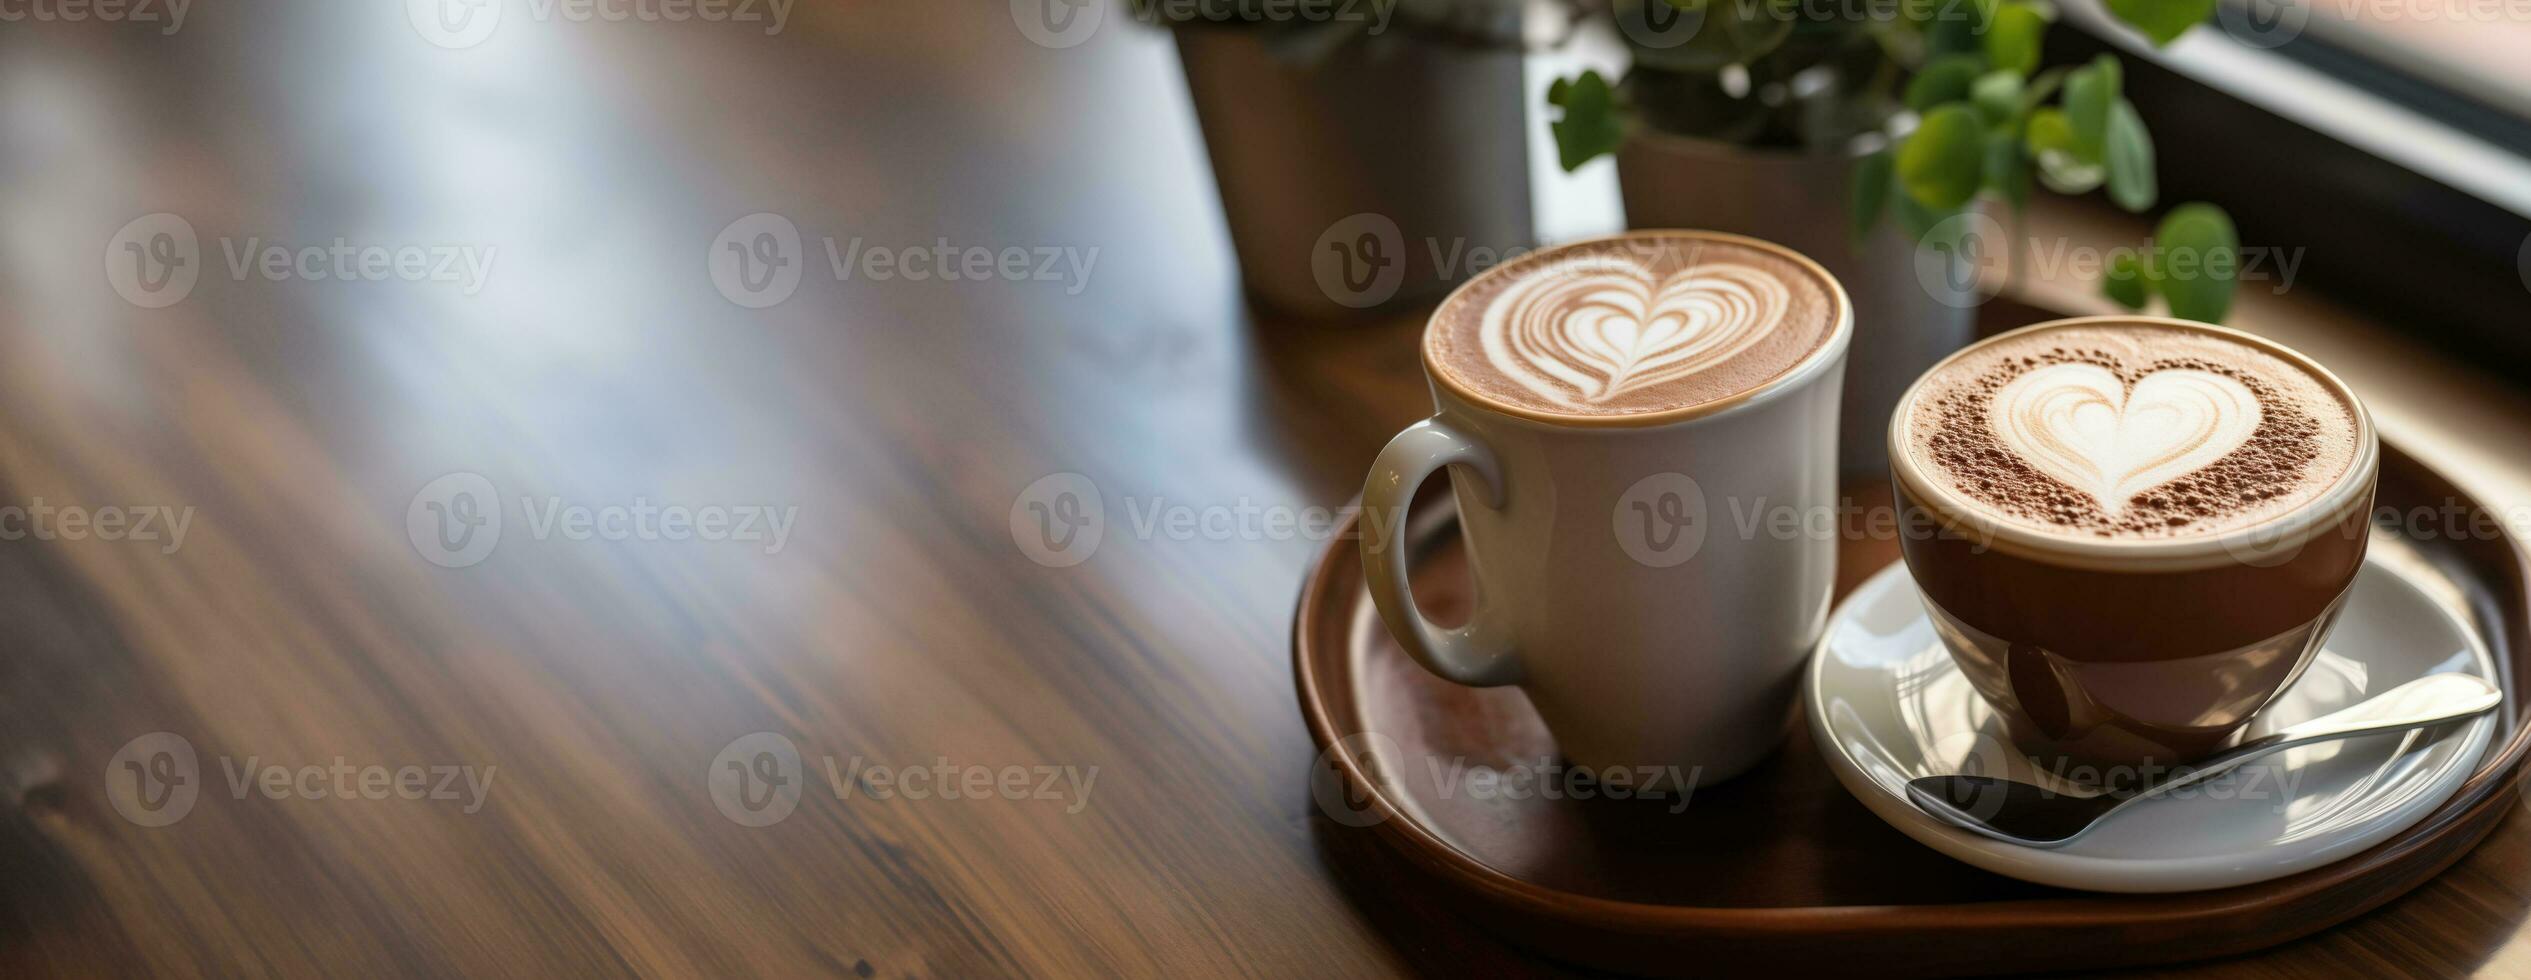 AI generated Valentines Day Coffee Shop Date Featuring Heart Shaped Latte Art on Reclaimed Wooden Tables with Terra Cotta and Creamy Espresso Colors photo